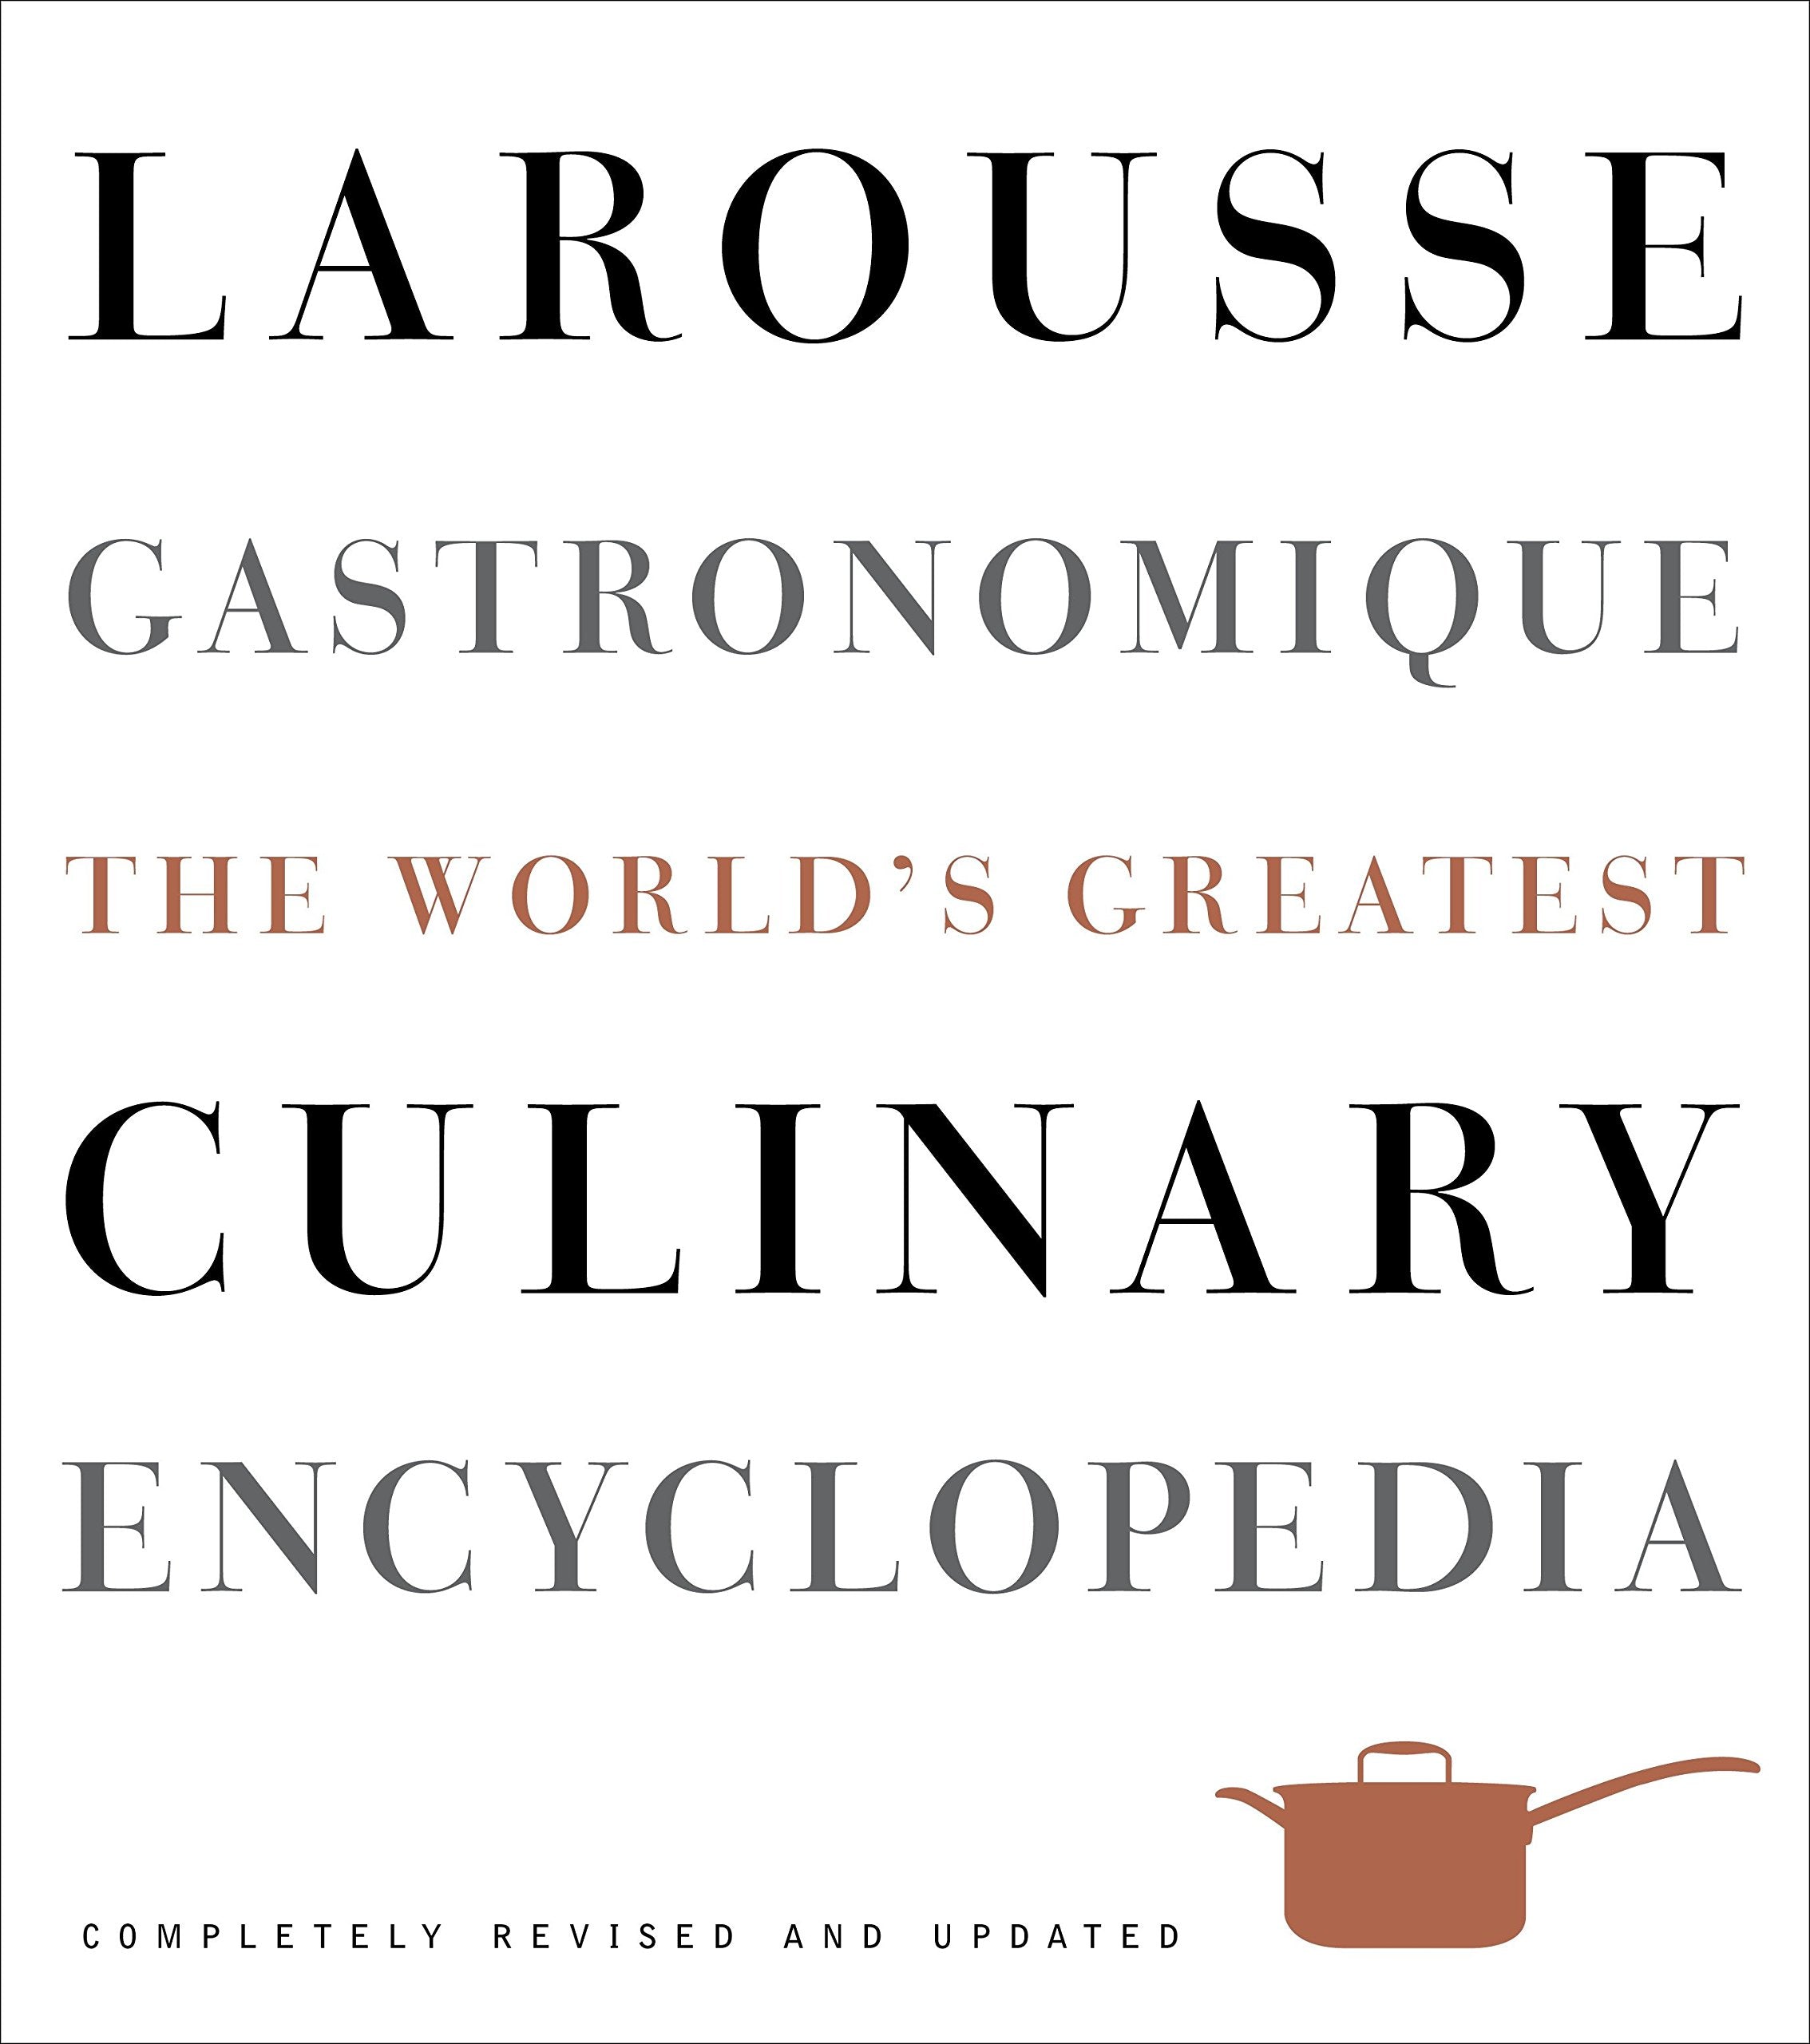 Larousse Gastronomique: The World's Greatest Culinary Encyclopedia, Completely Revised